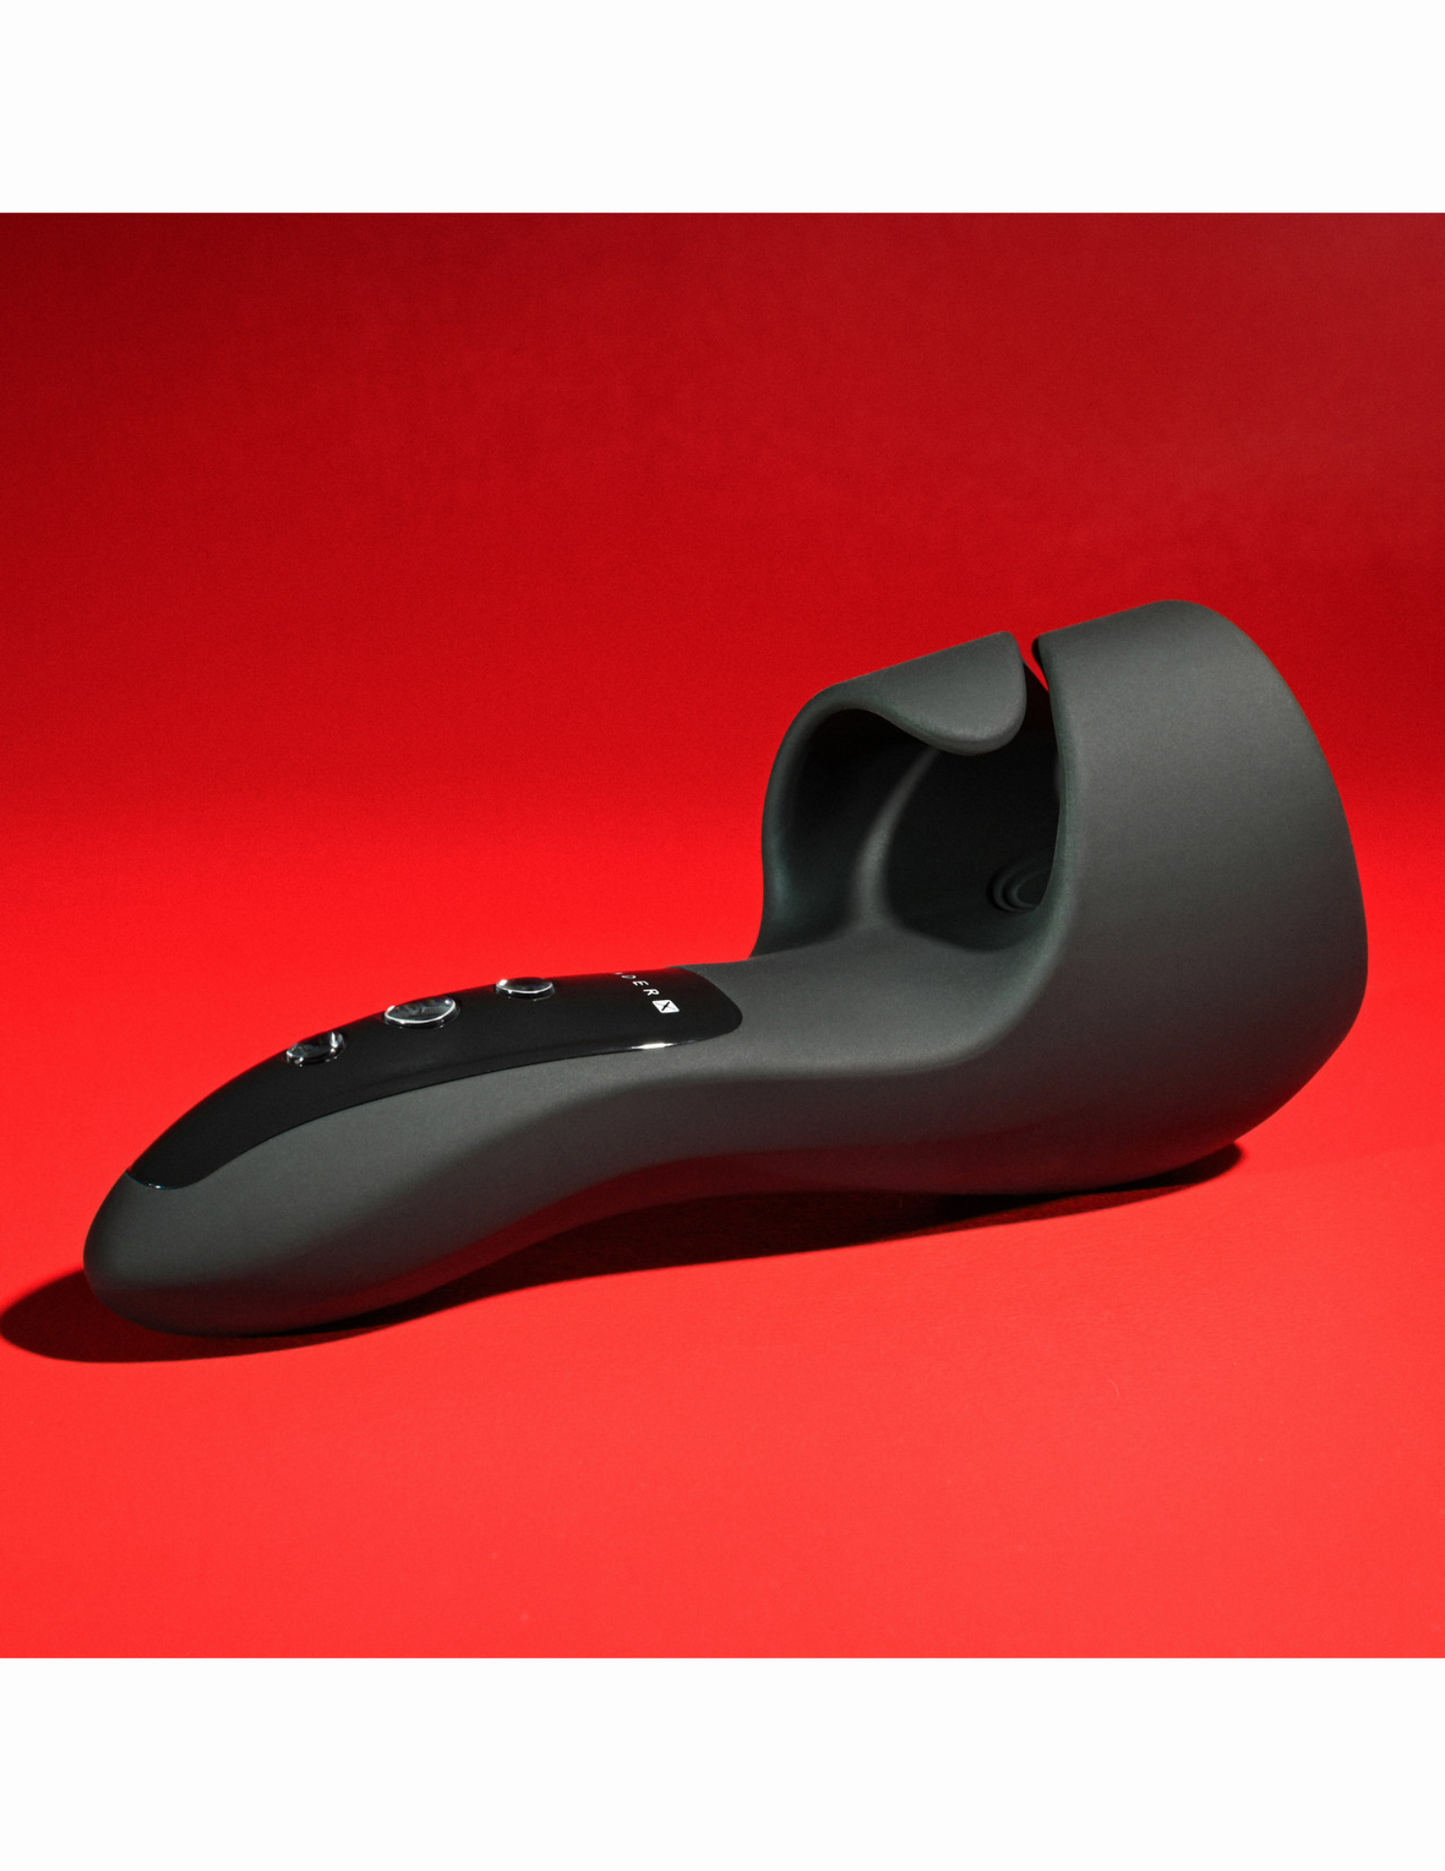 Side angle view of the Evolved Gender X Embrace Vibrating Stroker.